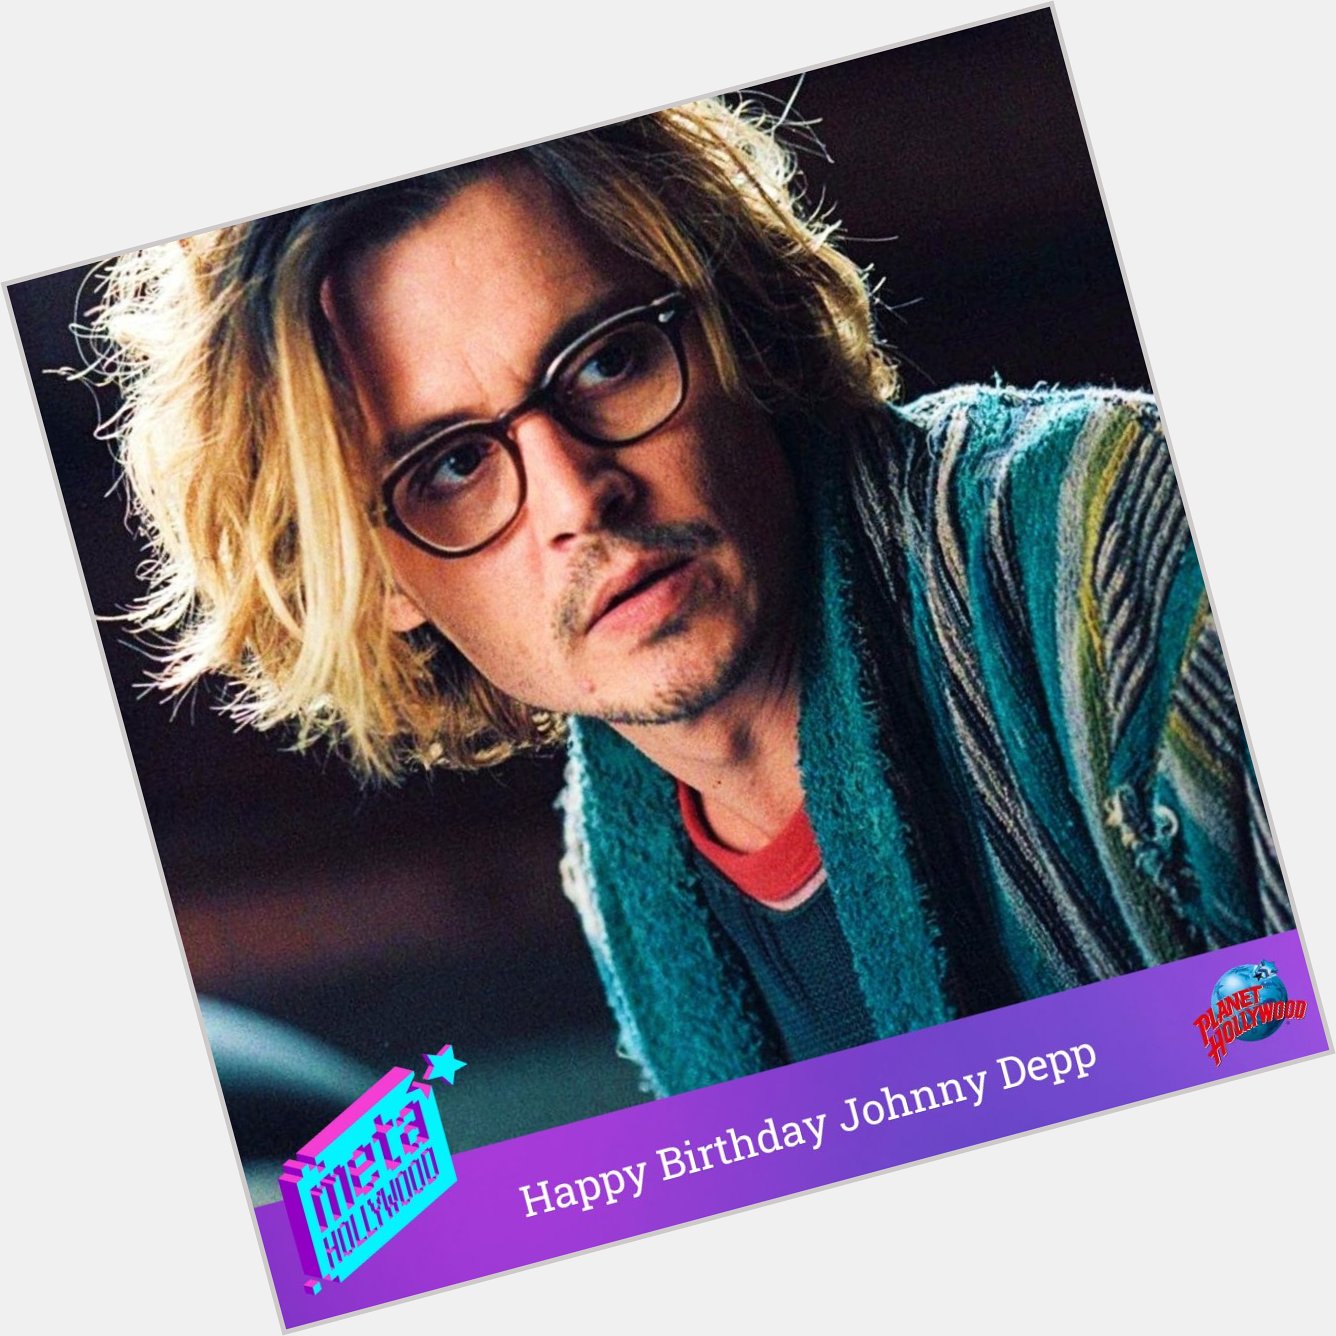 Happy Birthday, Johnny Depp! 
Share your favourite JD role in the comments below! 